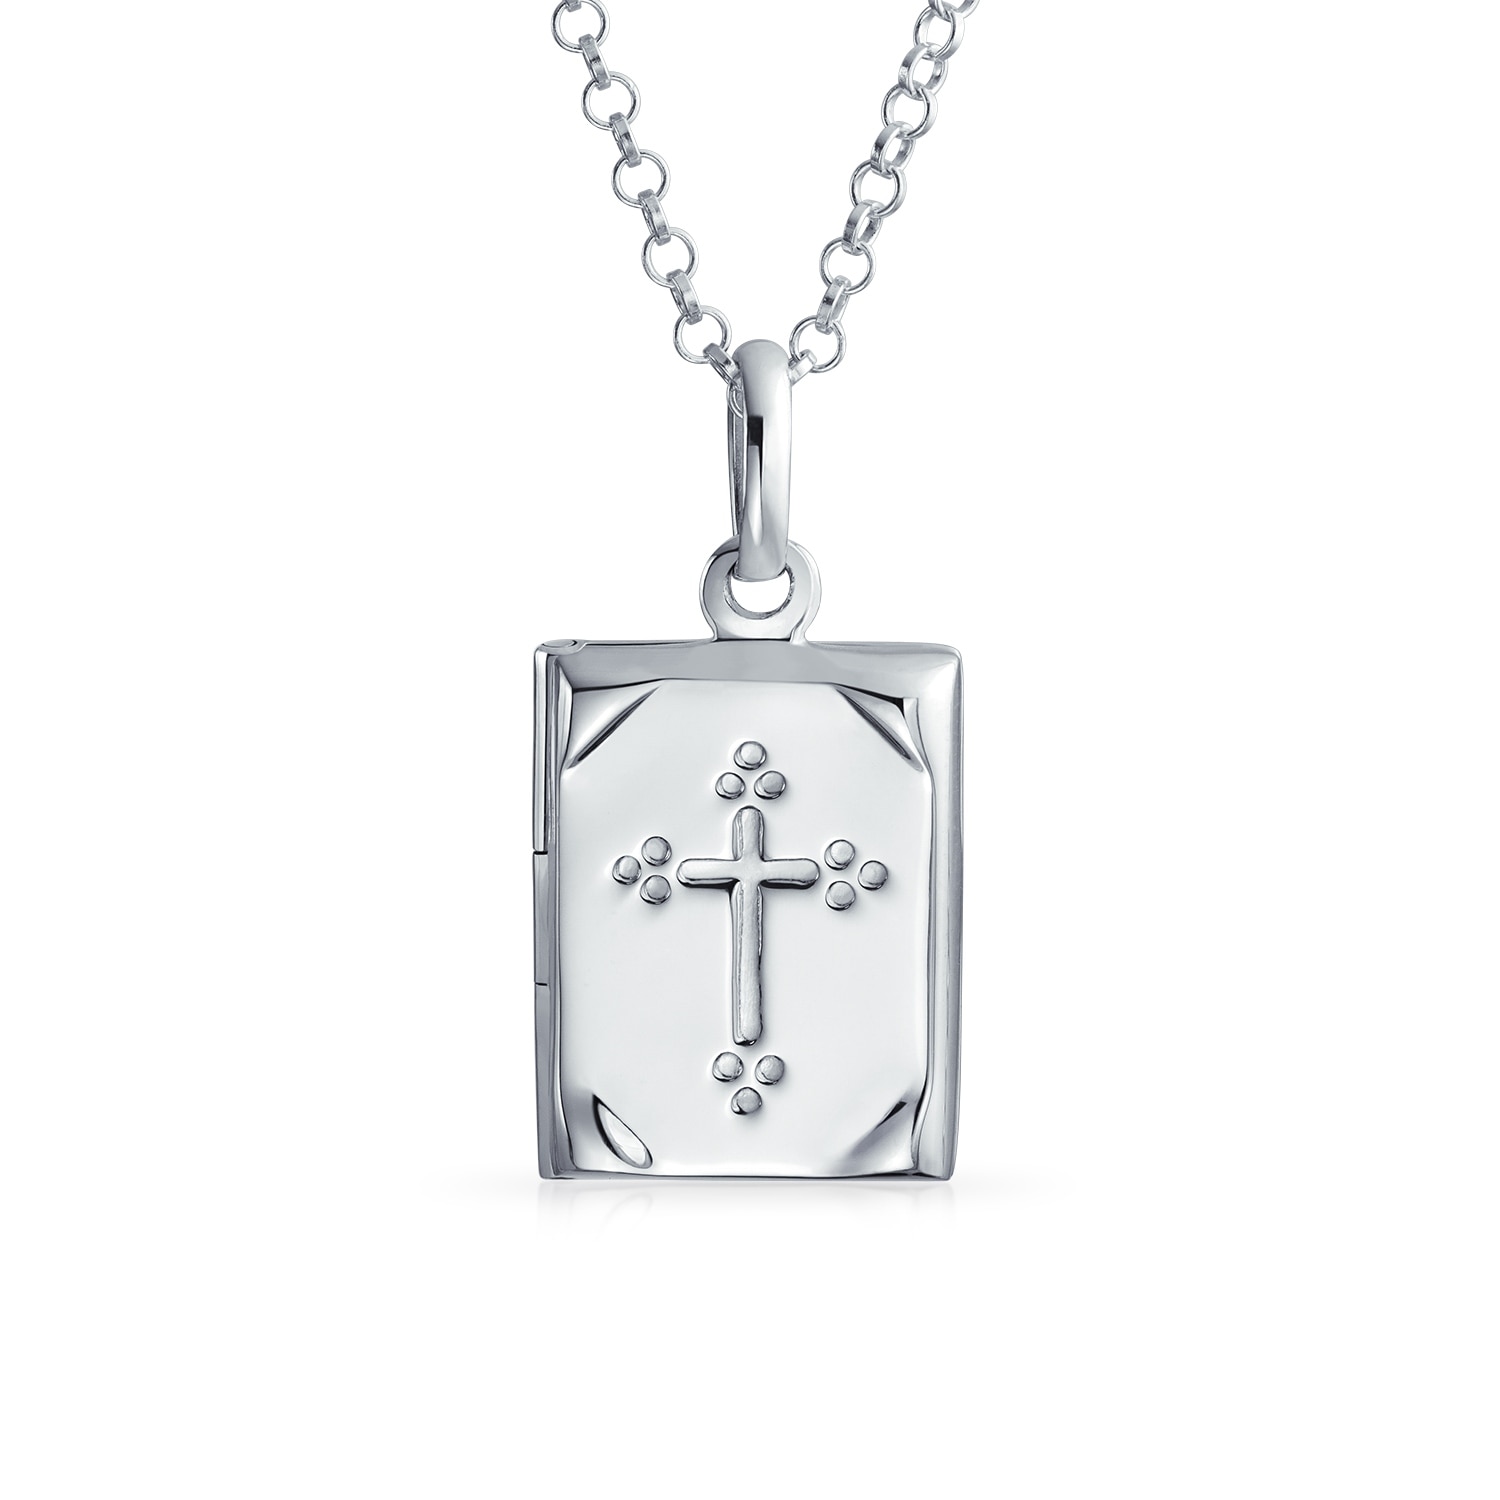 SMALL SILVER BIBLE LOCKET WITH CROSS DESIGN